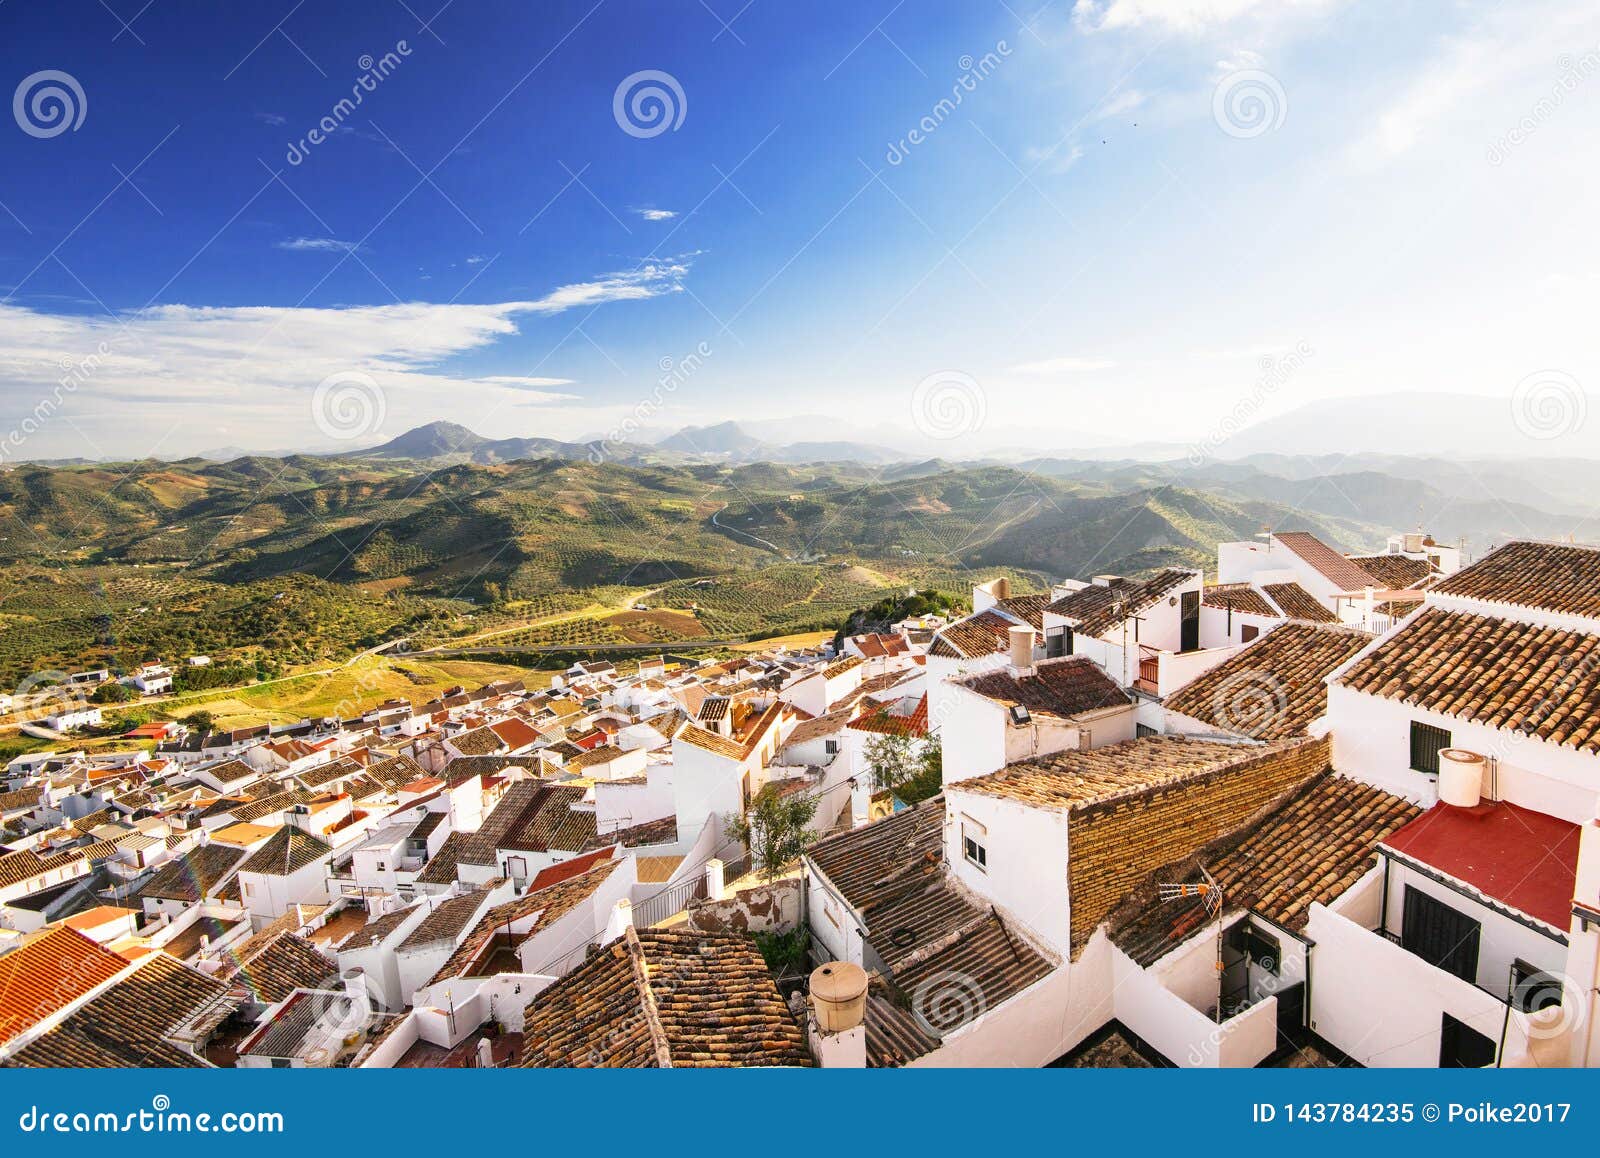 top view of olvera village, one of the beautiful white villages pueblos blancos of andalucia, spain